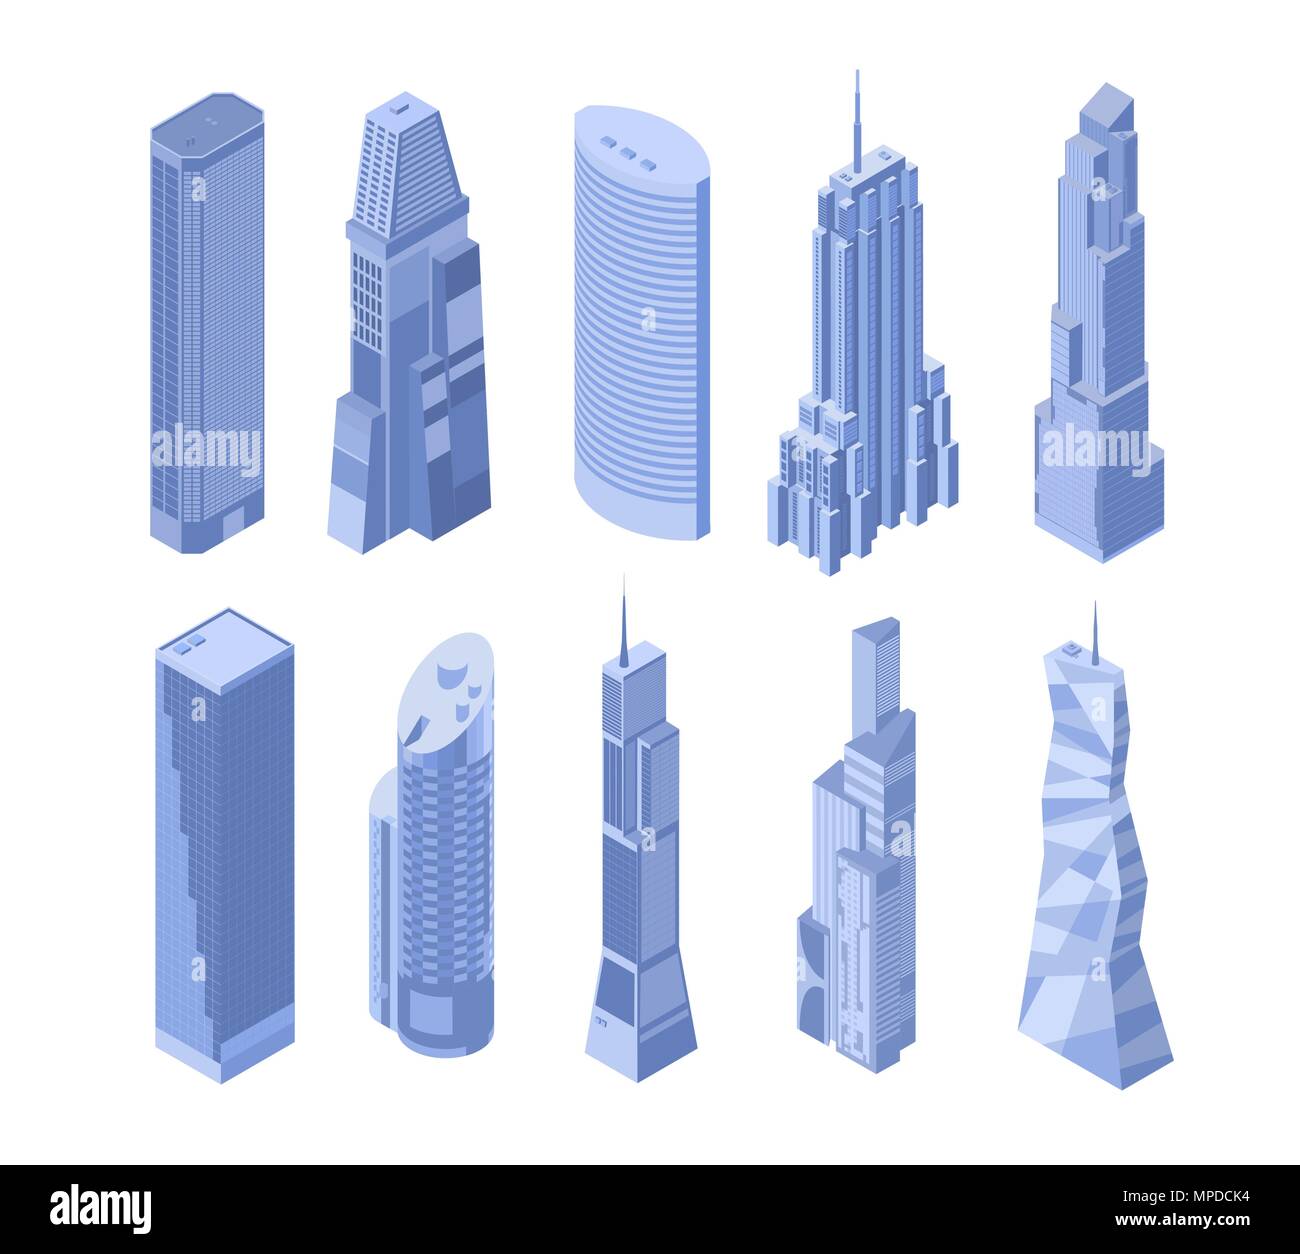 Set of ten vector isometric skyscrapers in shades of blue on a white background Stock Vector